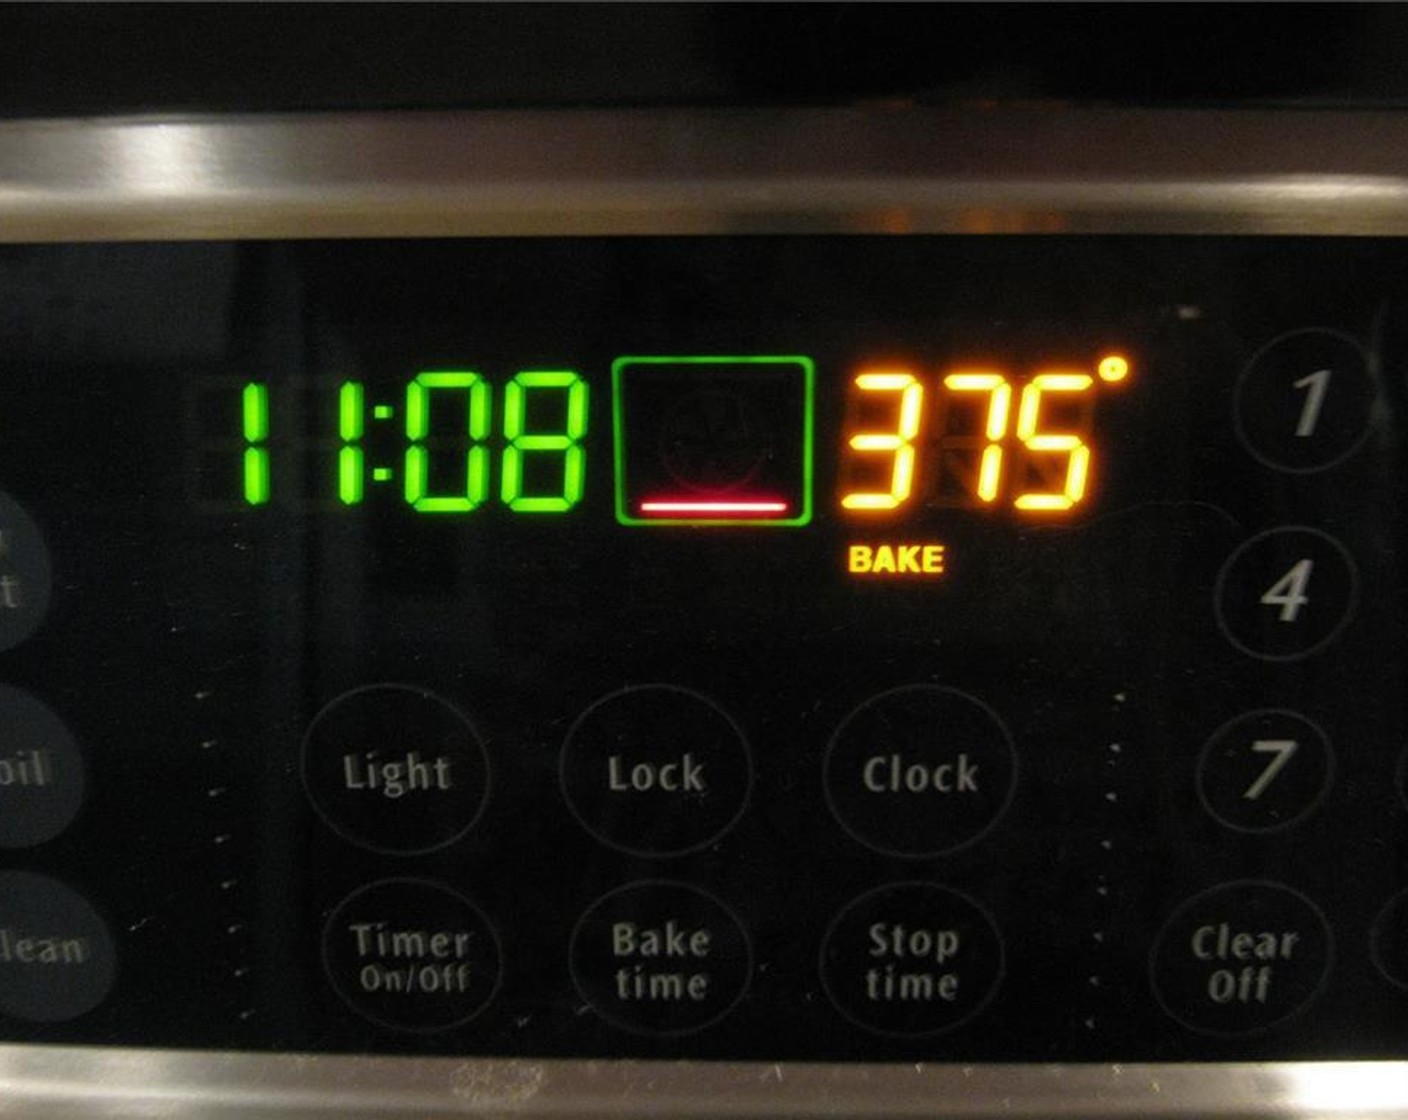 step 3 Preheat oven to 375 degrees F (190 degrees C).